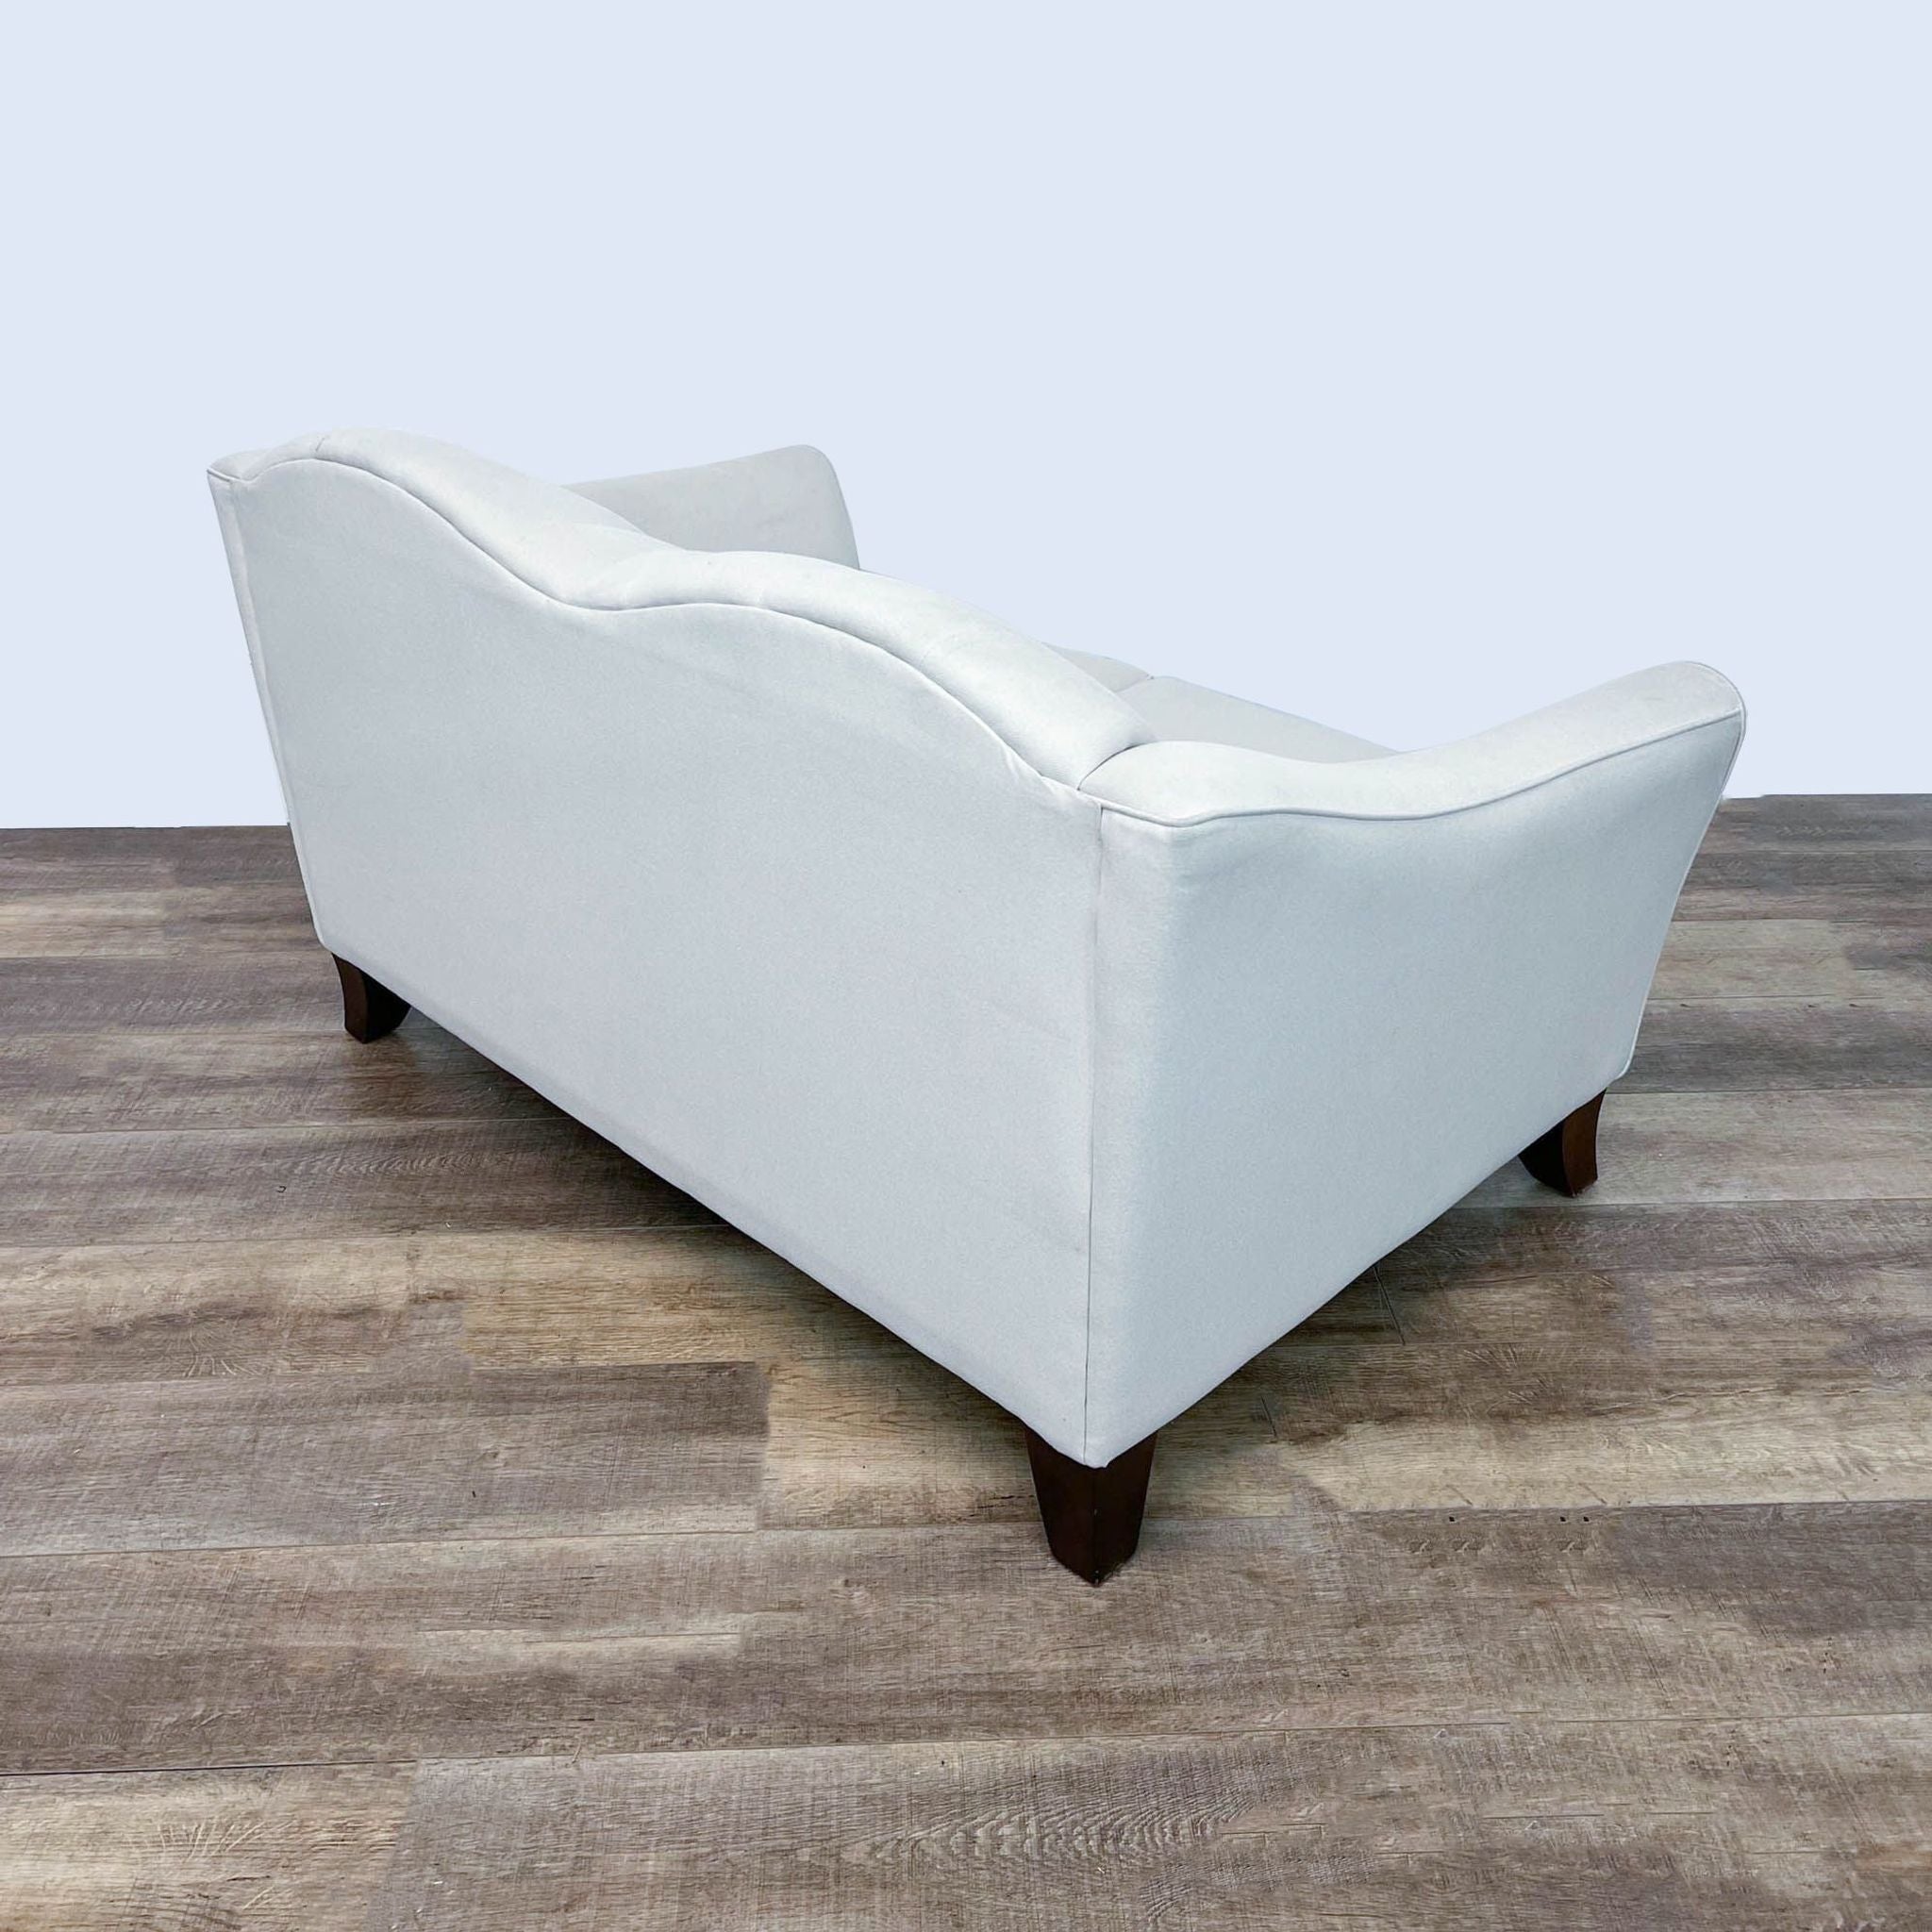 Bauhaus Furniture loveseat with tufted back, sloped arms, and dark finish feet on a wooden floor.